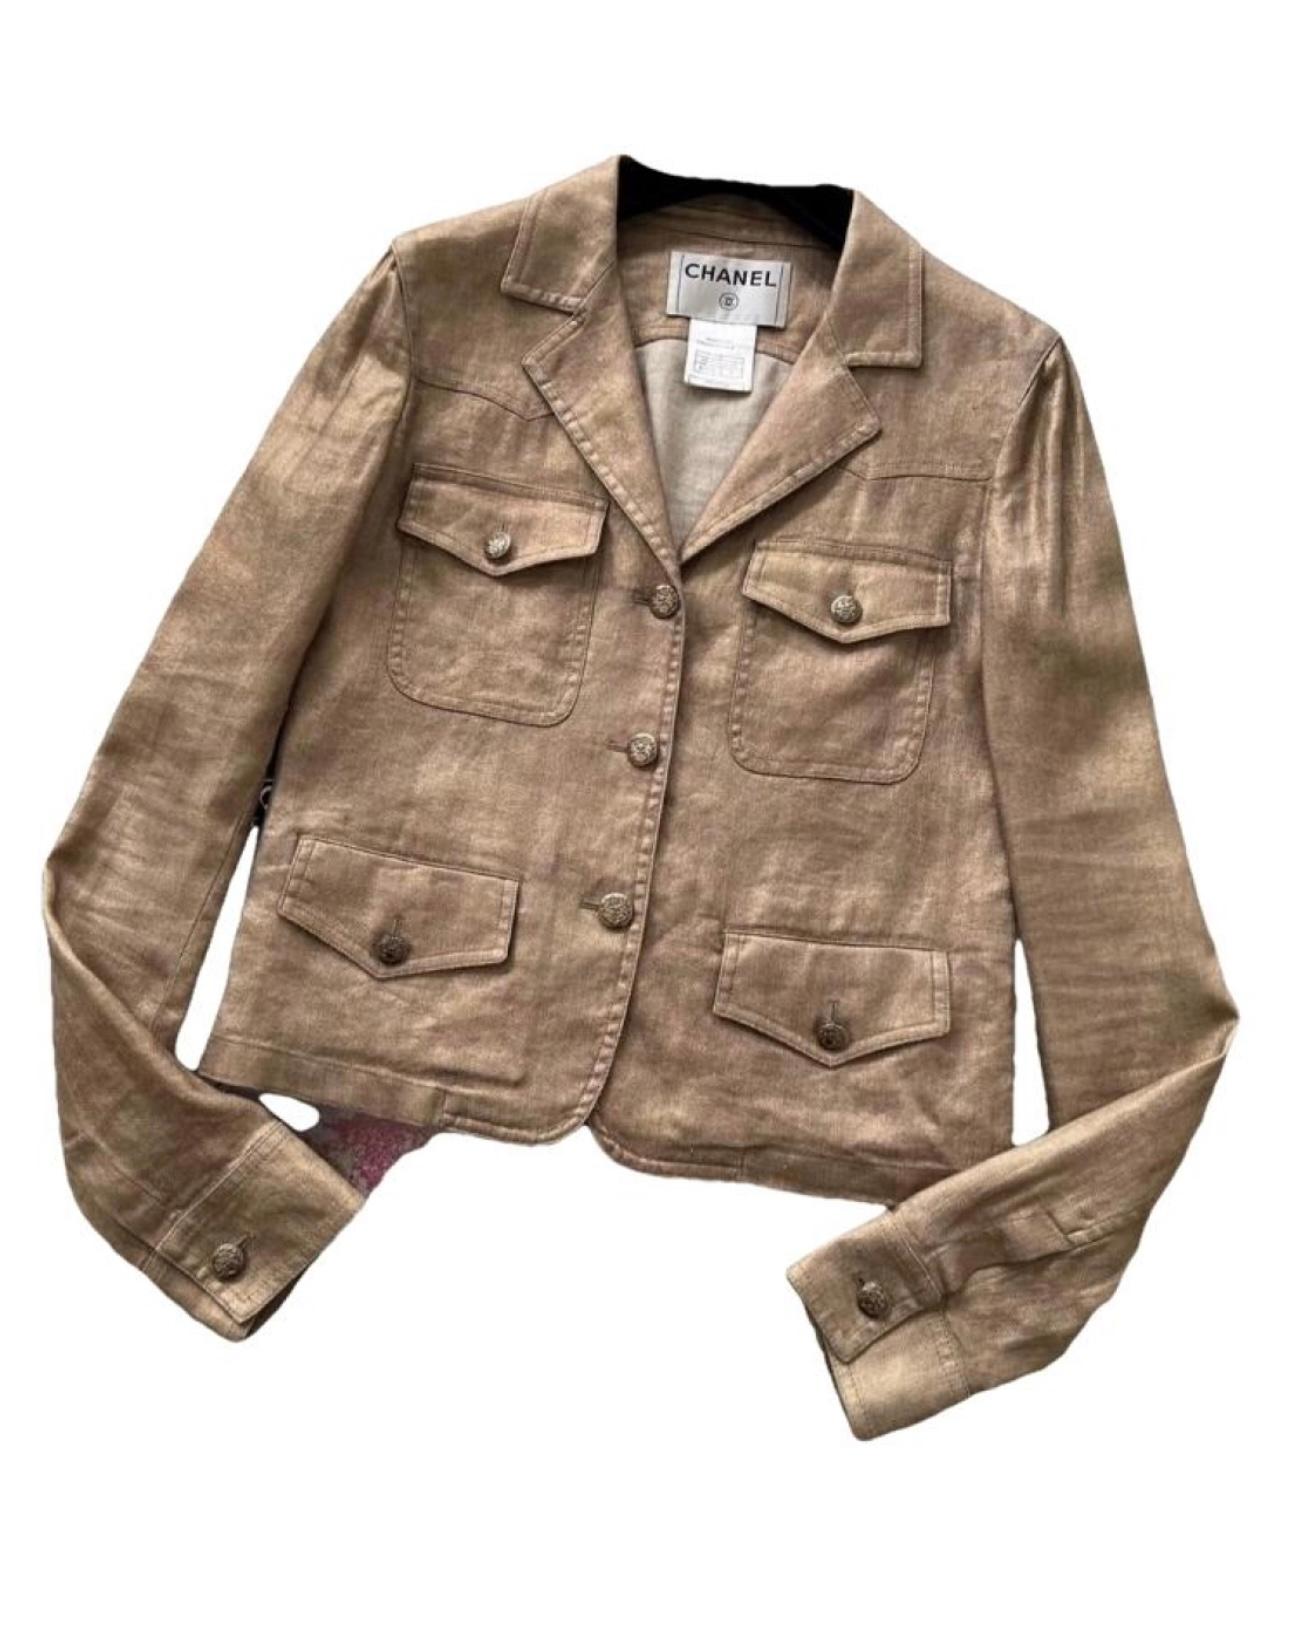 Women's or Men's Chanel CC Buttons Nude Beige Jacket For Sale